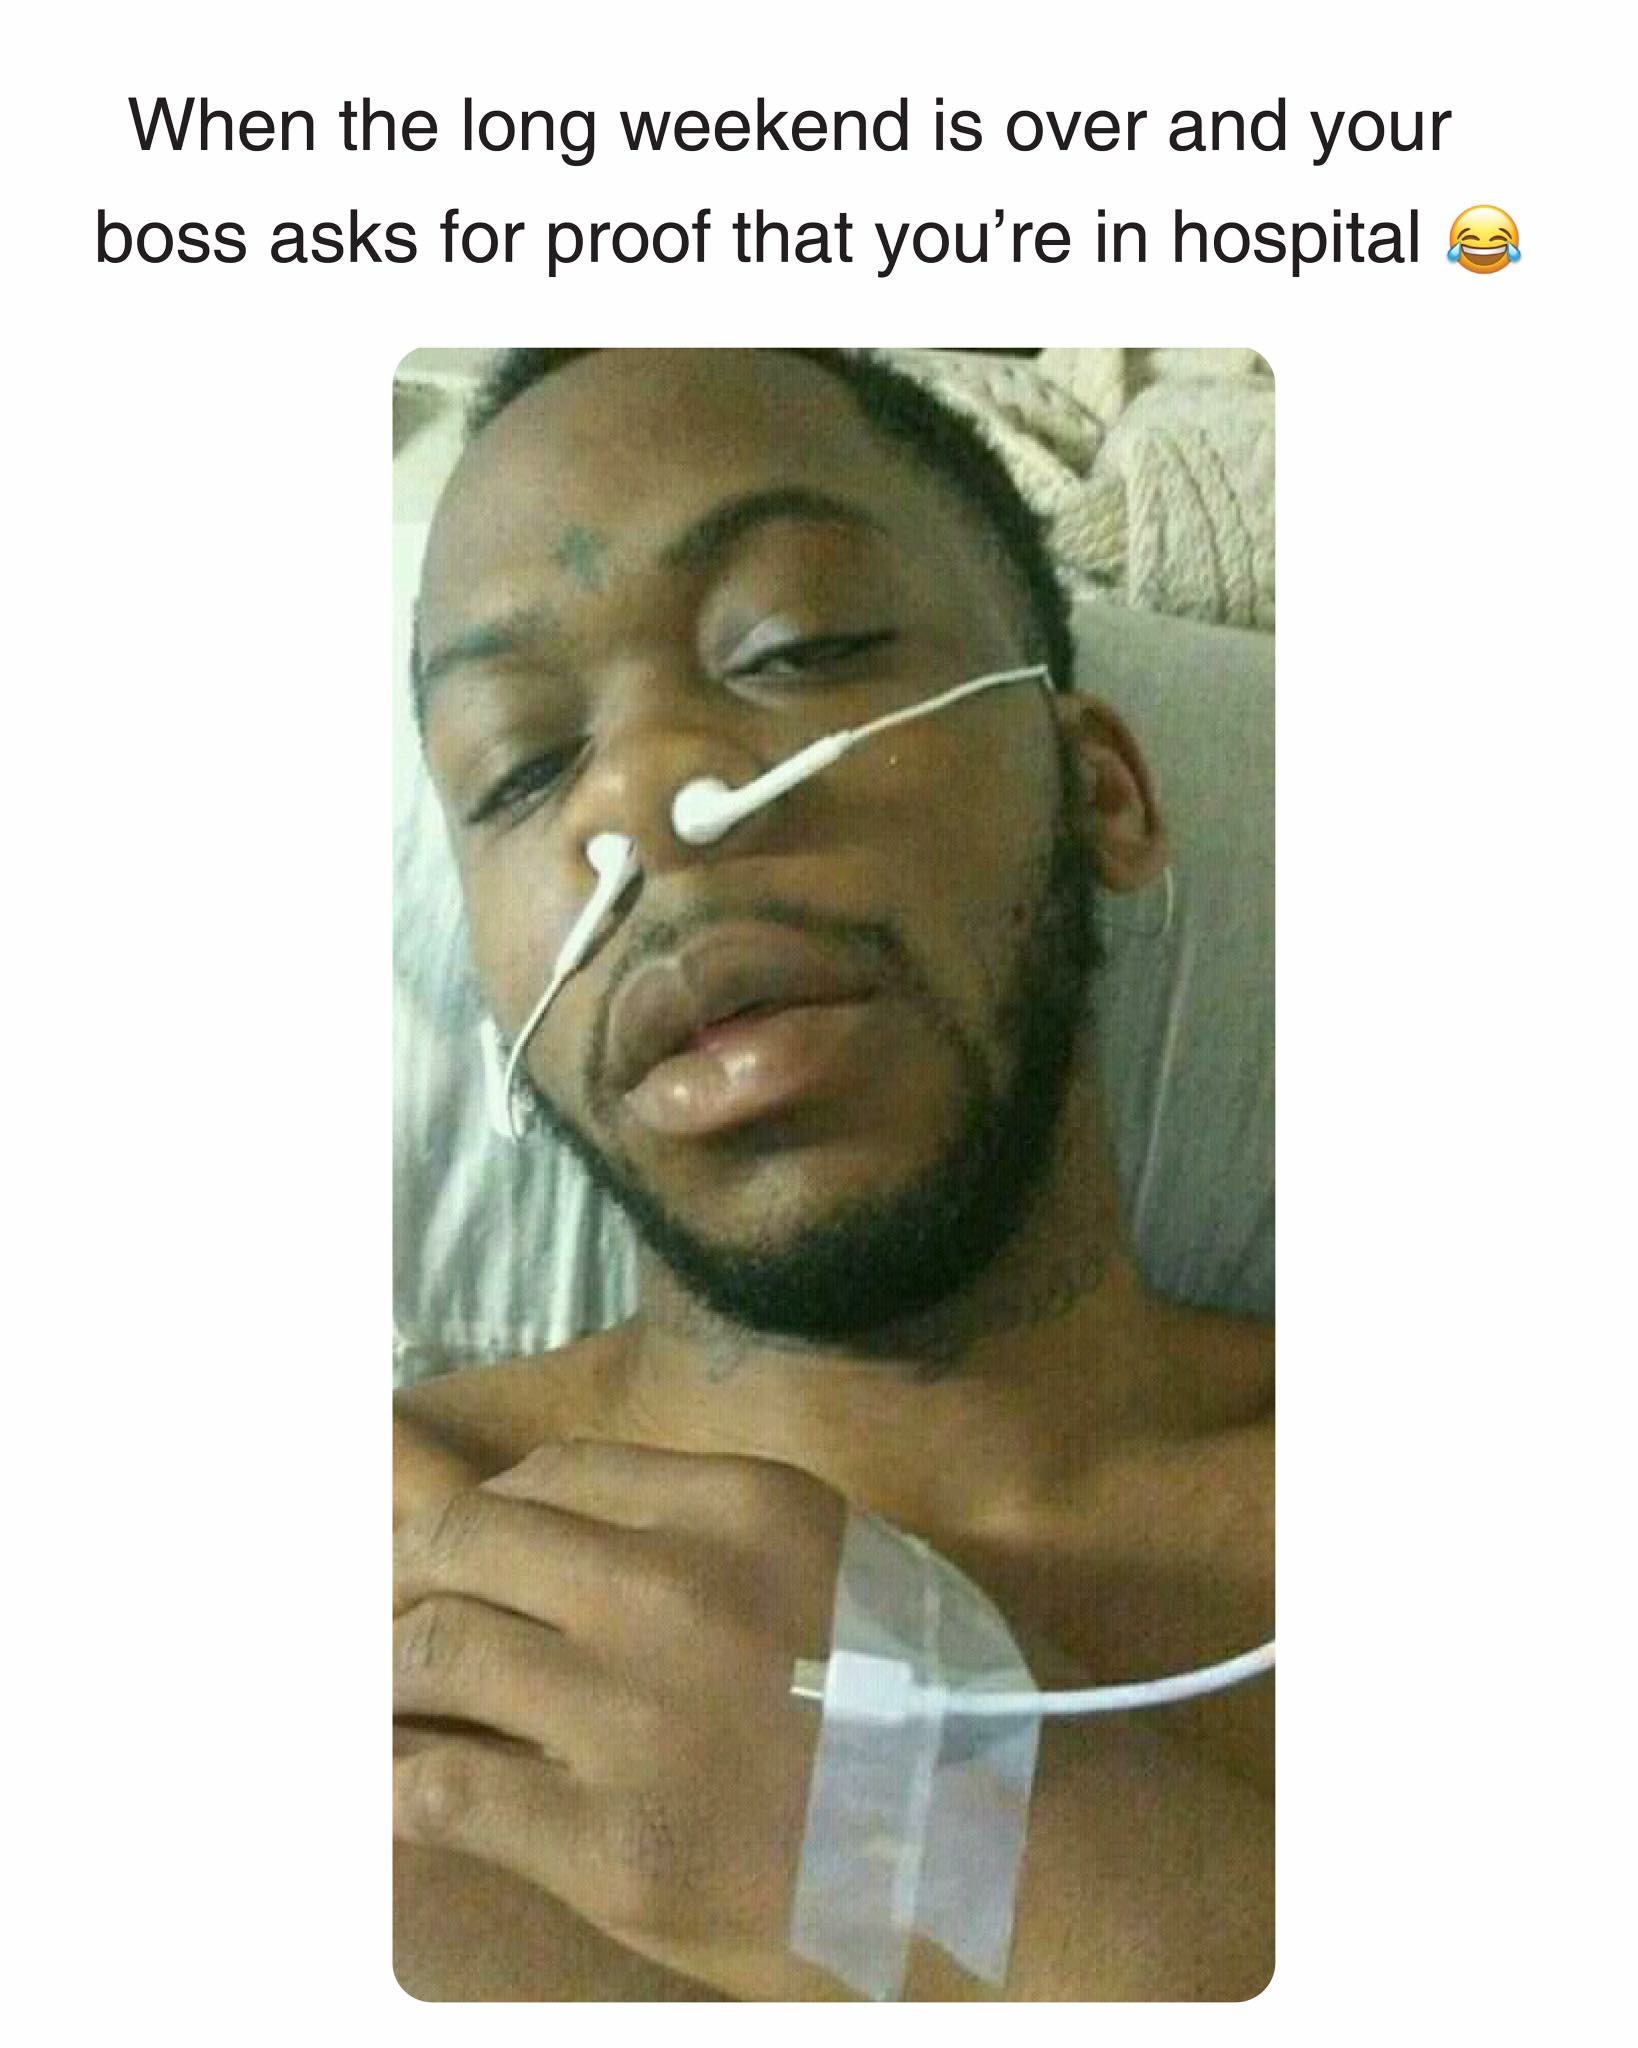 your boss asks for proof you - When the long weekend is over and your boss asks for proof that you're in hospital a